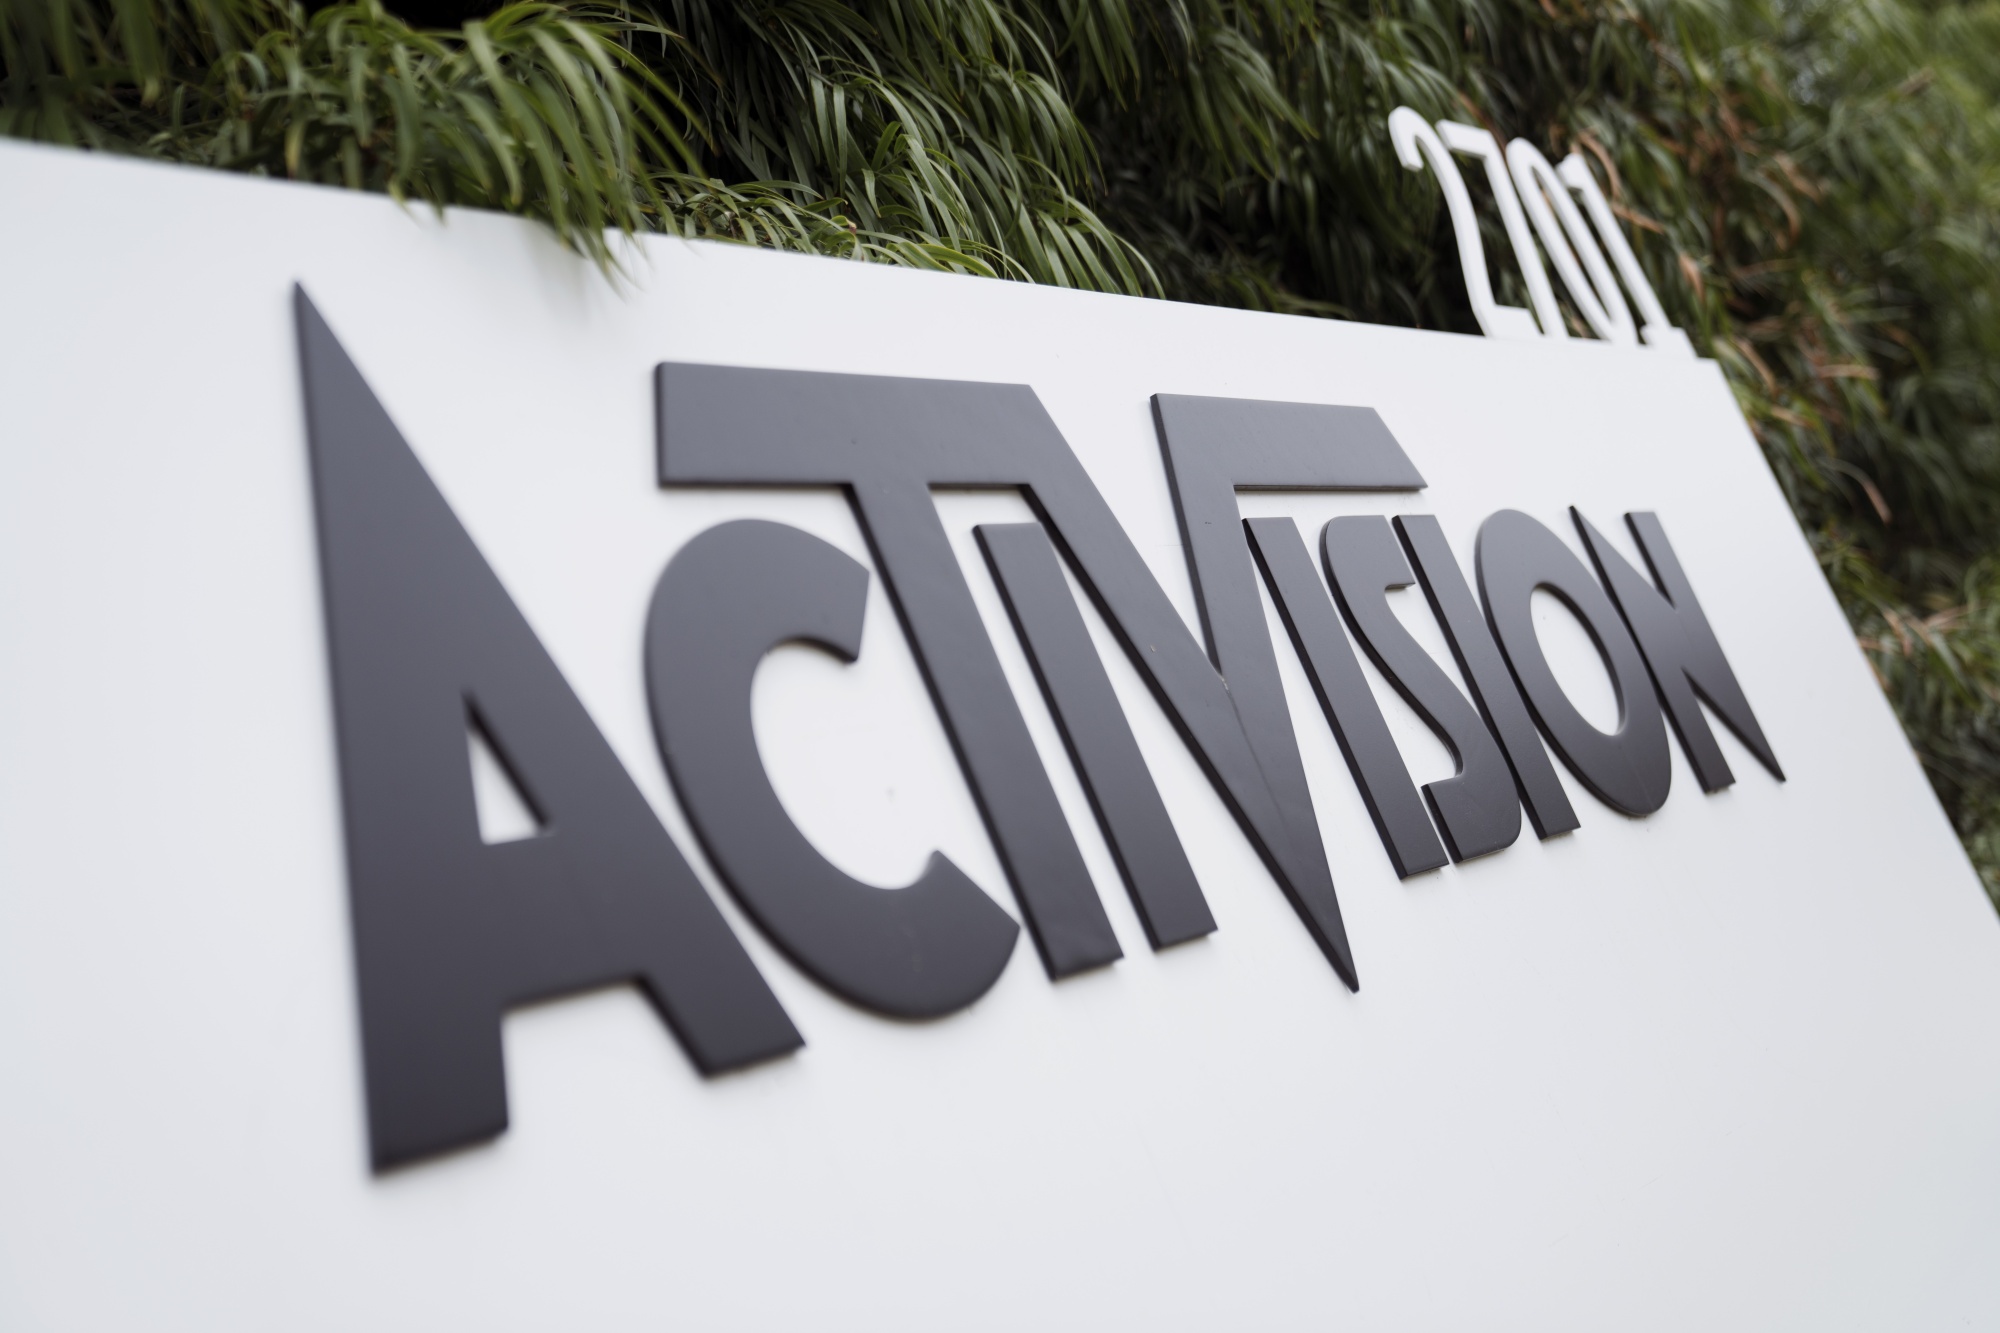 Activision Shareholders Reject Union Support Proposal at Annual Meeting  (ATVI) - Bloomberg